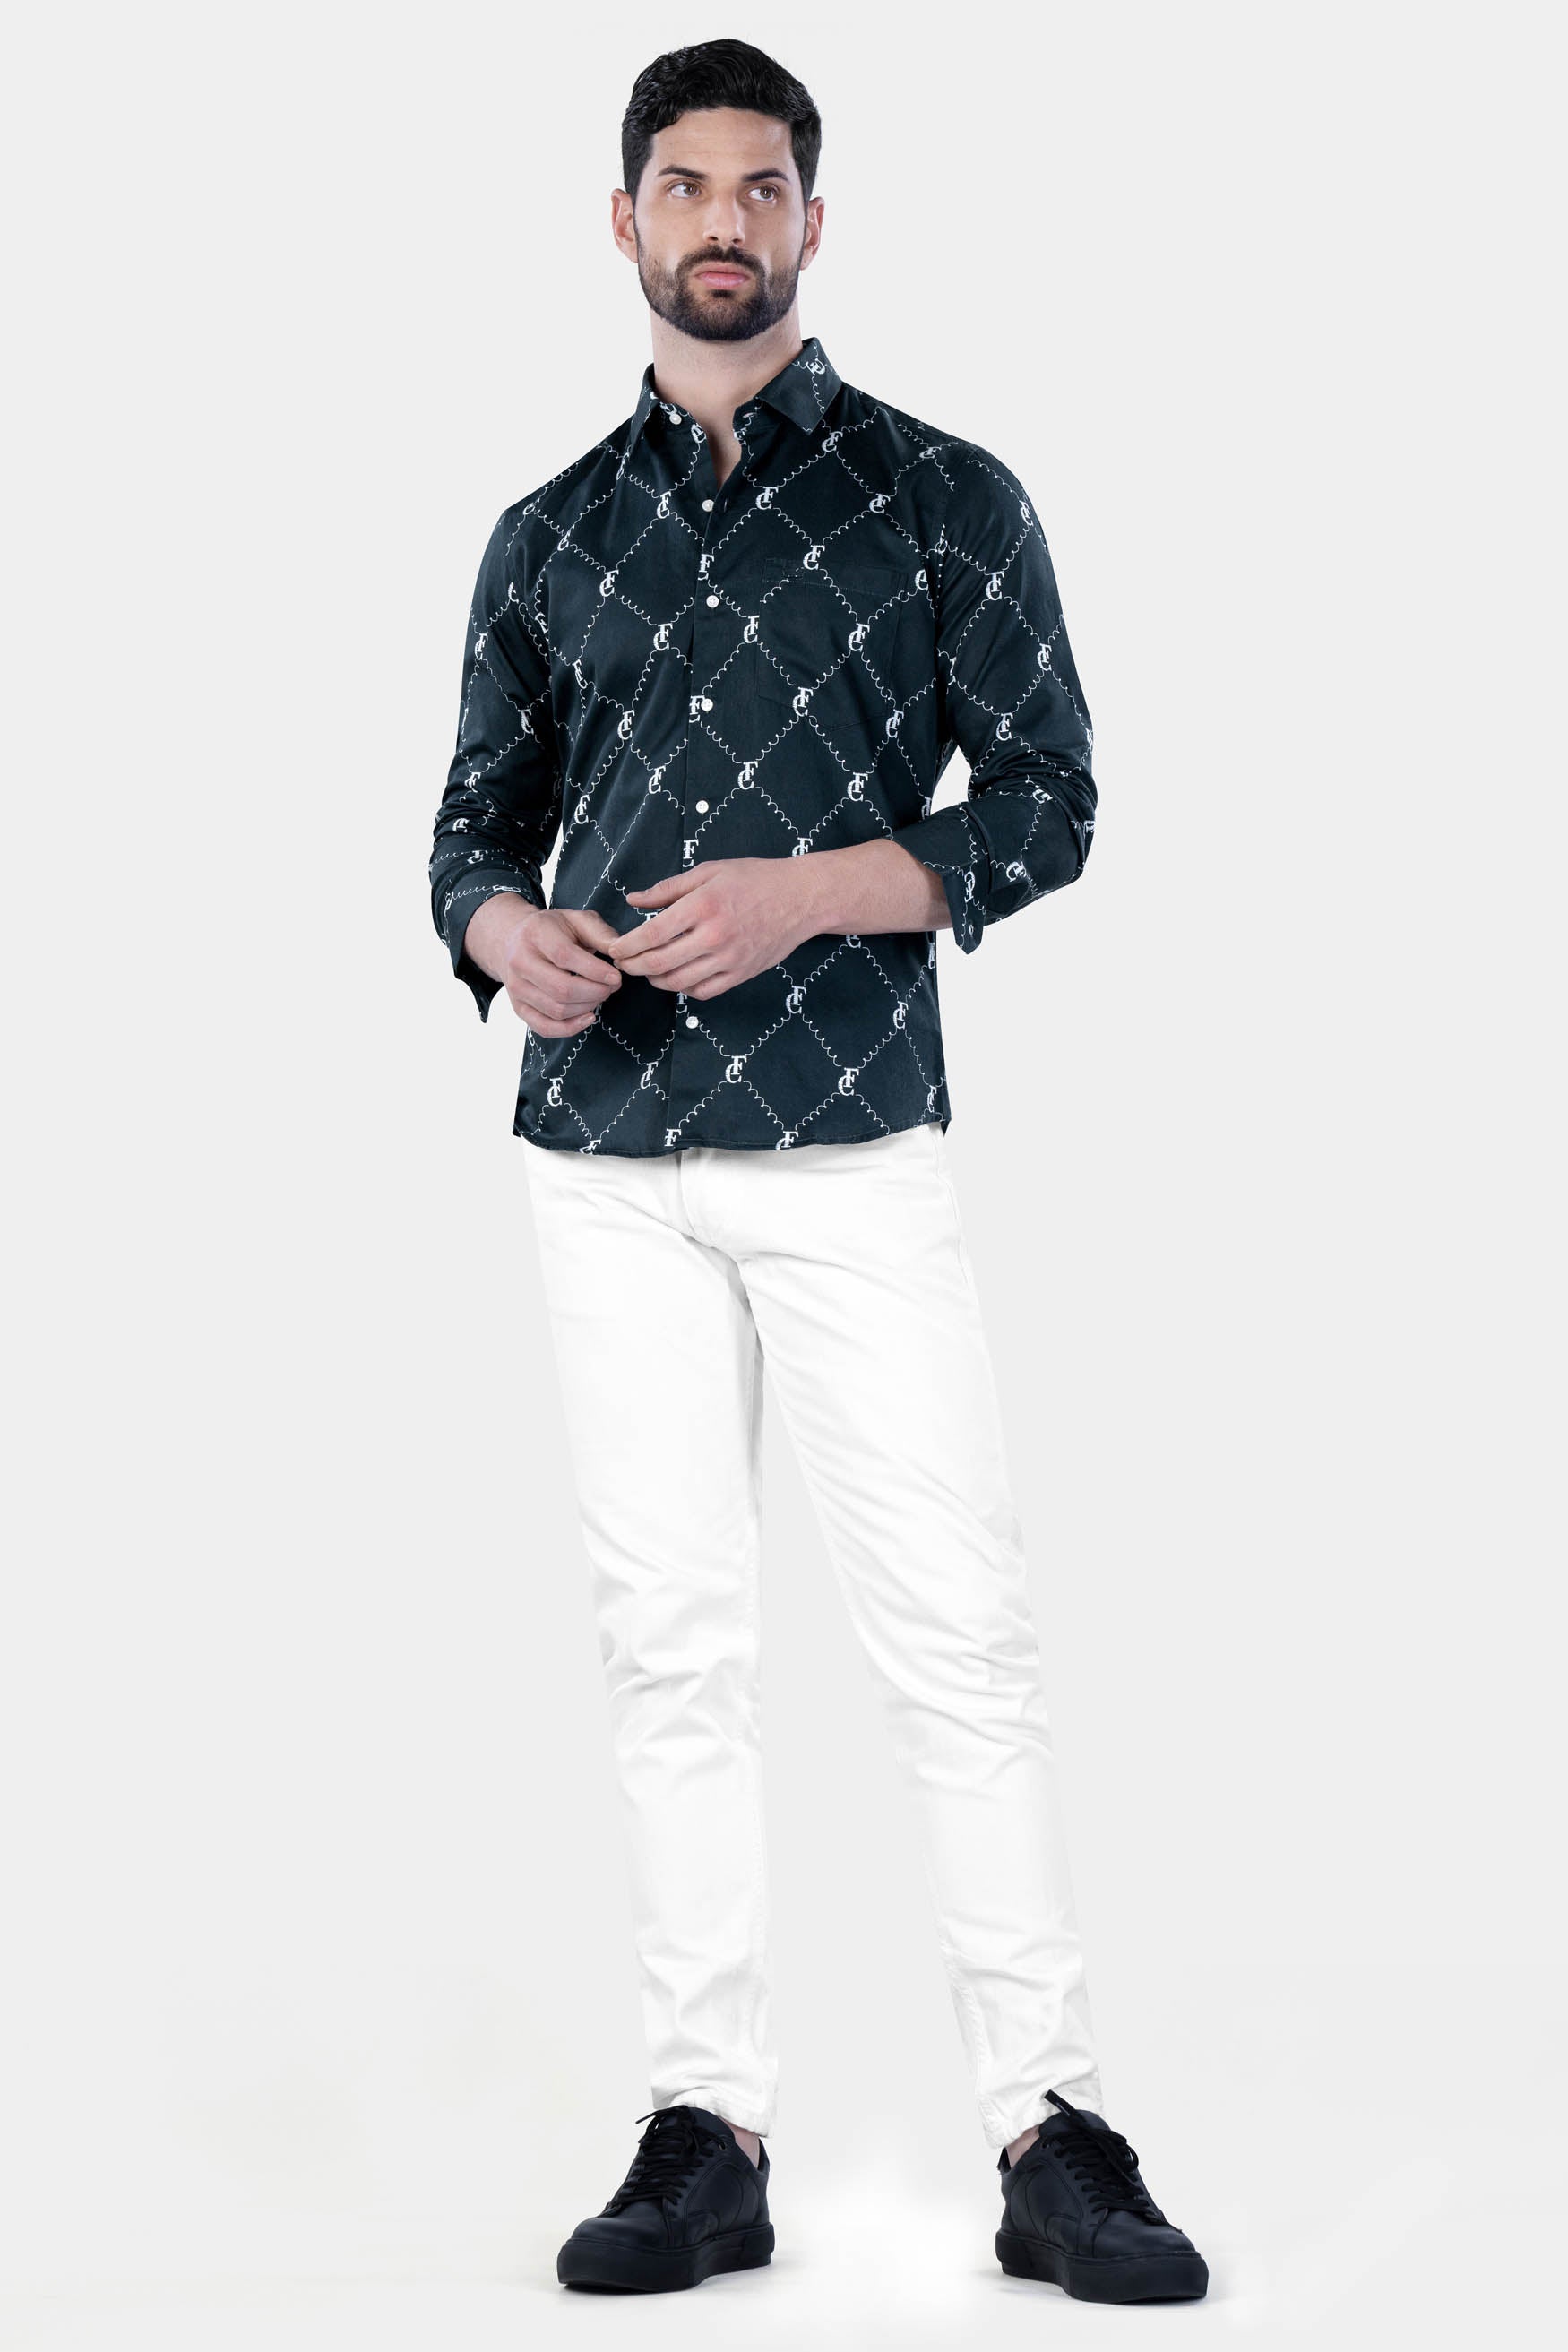  Firefly Blue and White with Brand Elements and Geometric Printed Subtle Sheen Super Soft Premium Cotton Designer Shirt 12100-38, 12100-H-38, 12100-39, 12100-H-39, 12100-40, 12100-H-40, 12100-42, 12100-H-42, 12100-44, 12100-H-44, 12100-46, 12100-H-46, 12100-48, 12100-H-48, 12100-50, 12100-H-50, 12100-52, 12100-H-52